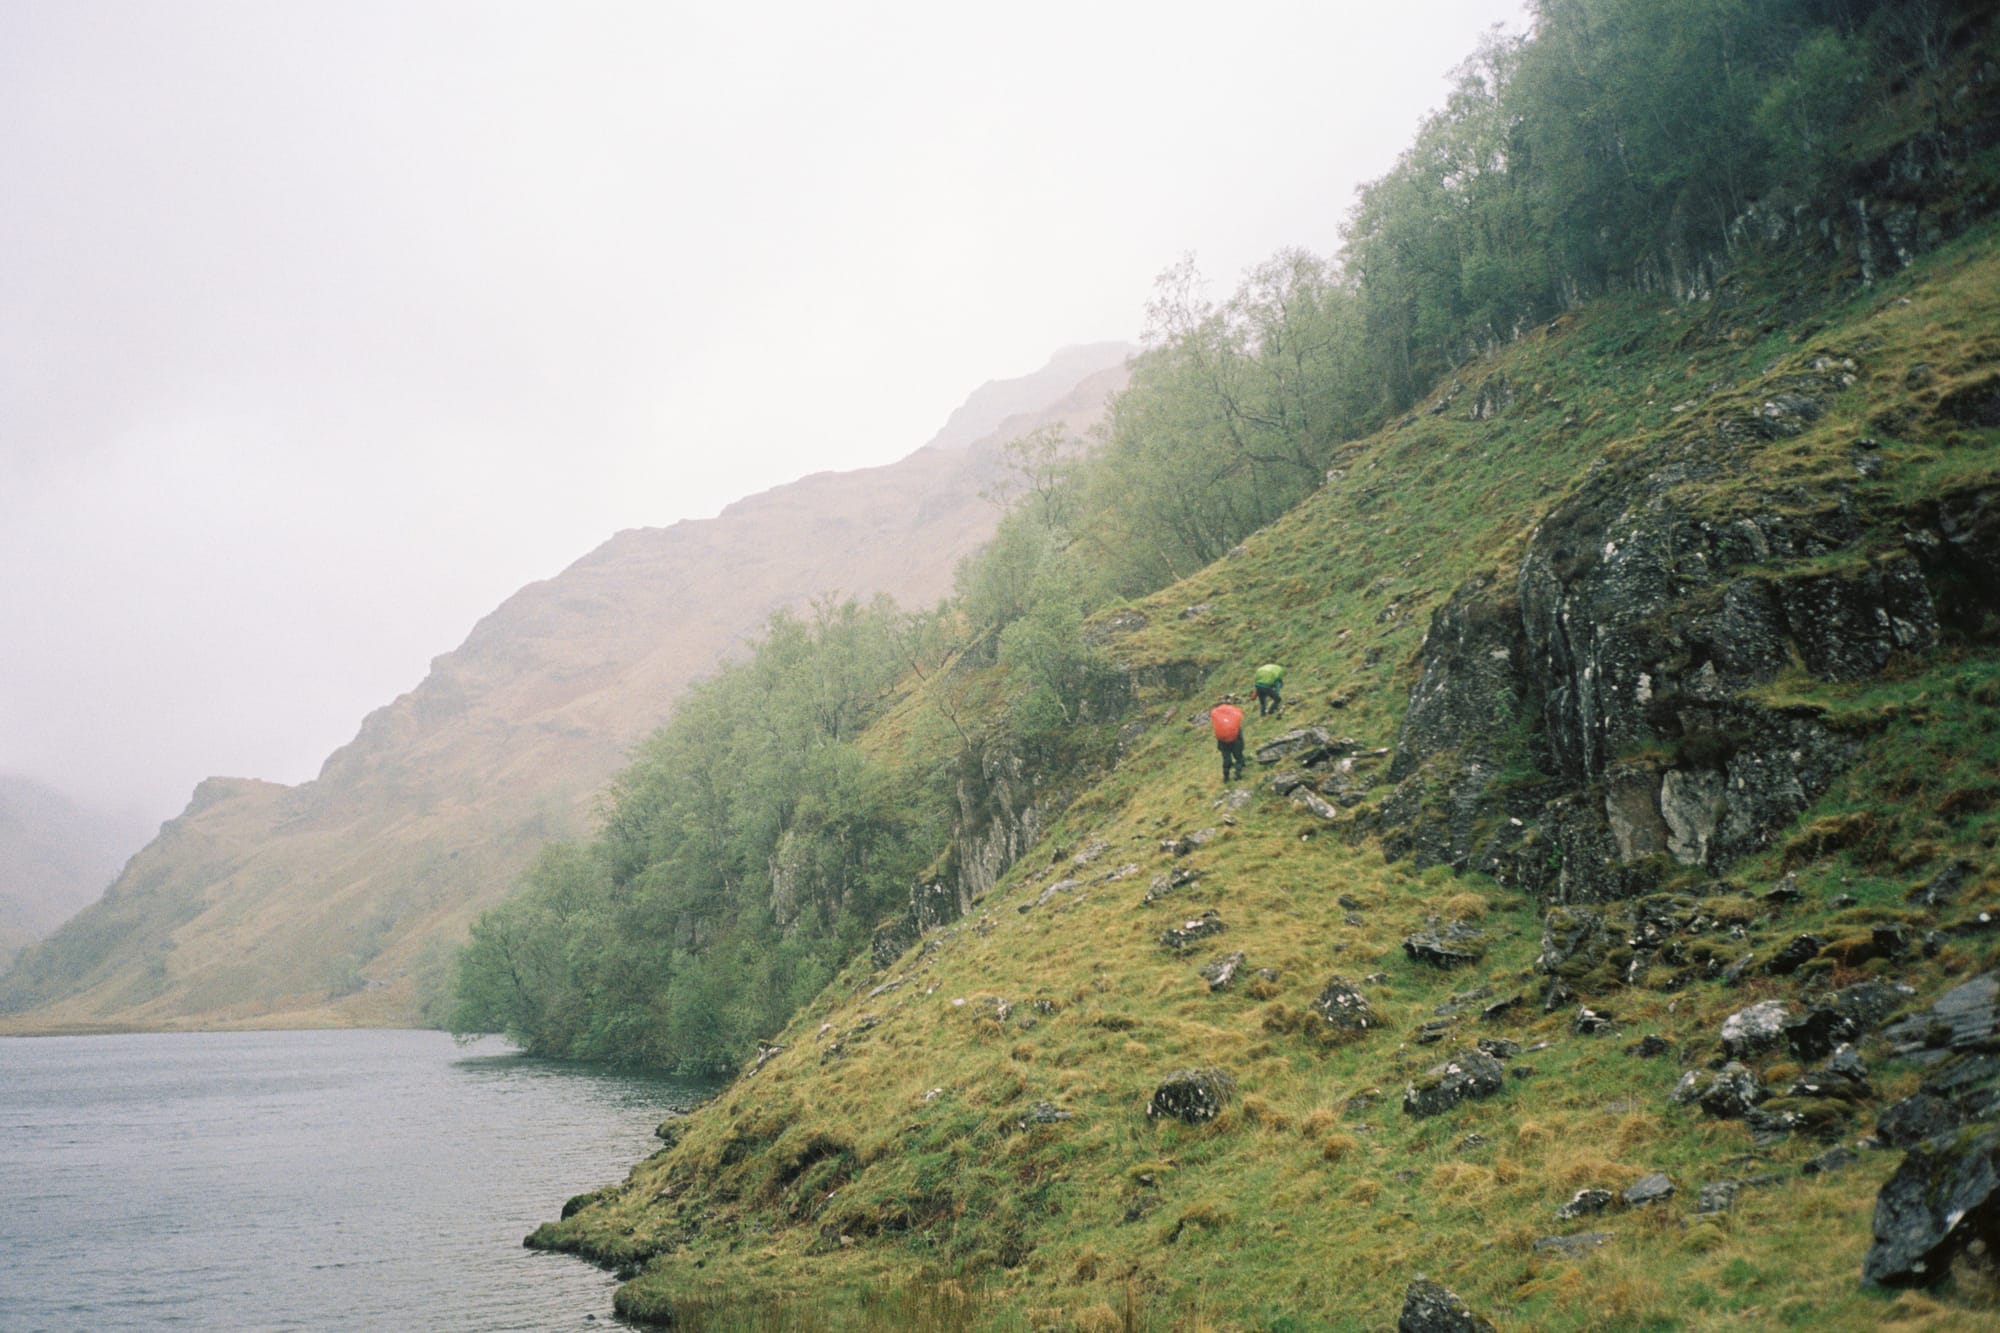 A photo of a hike in Knoydart, Scotland. Two people are in the distance hiking up a munro on the coast near a body of water.